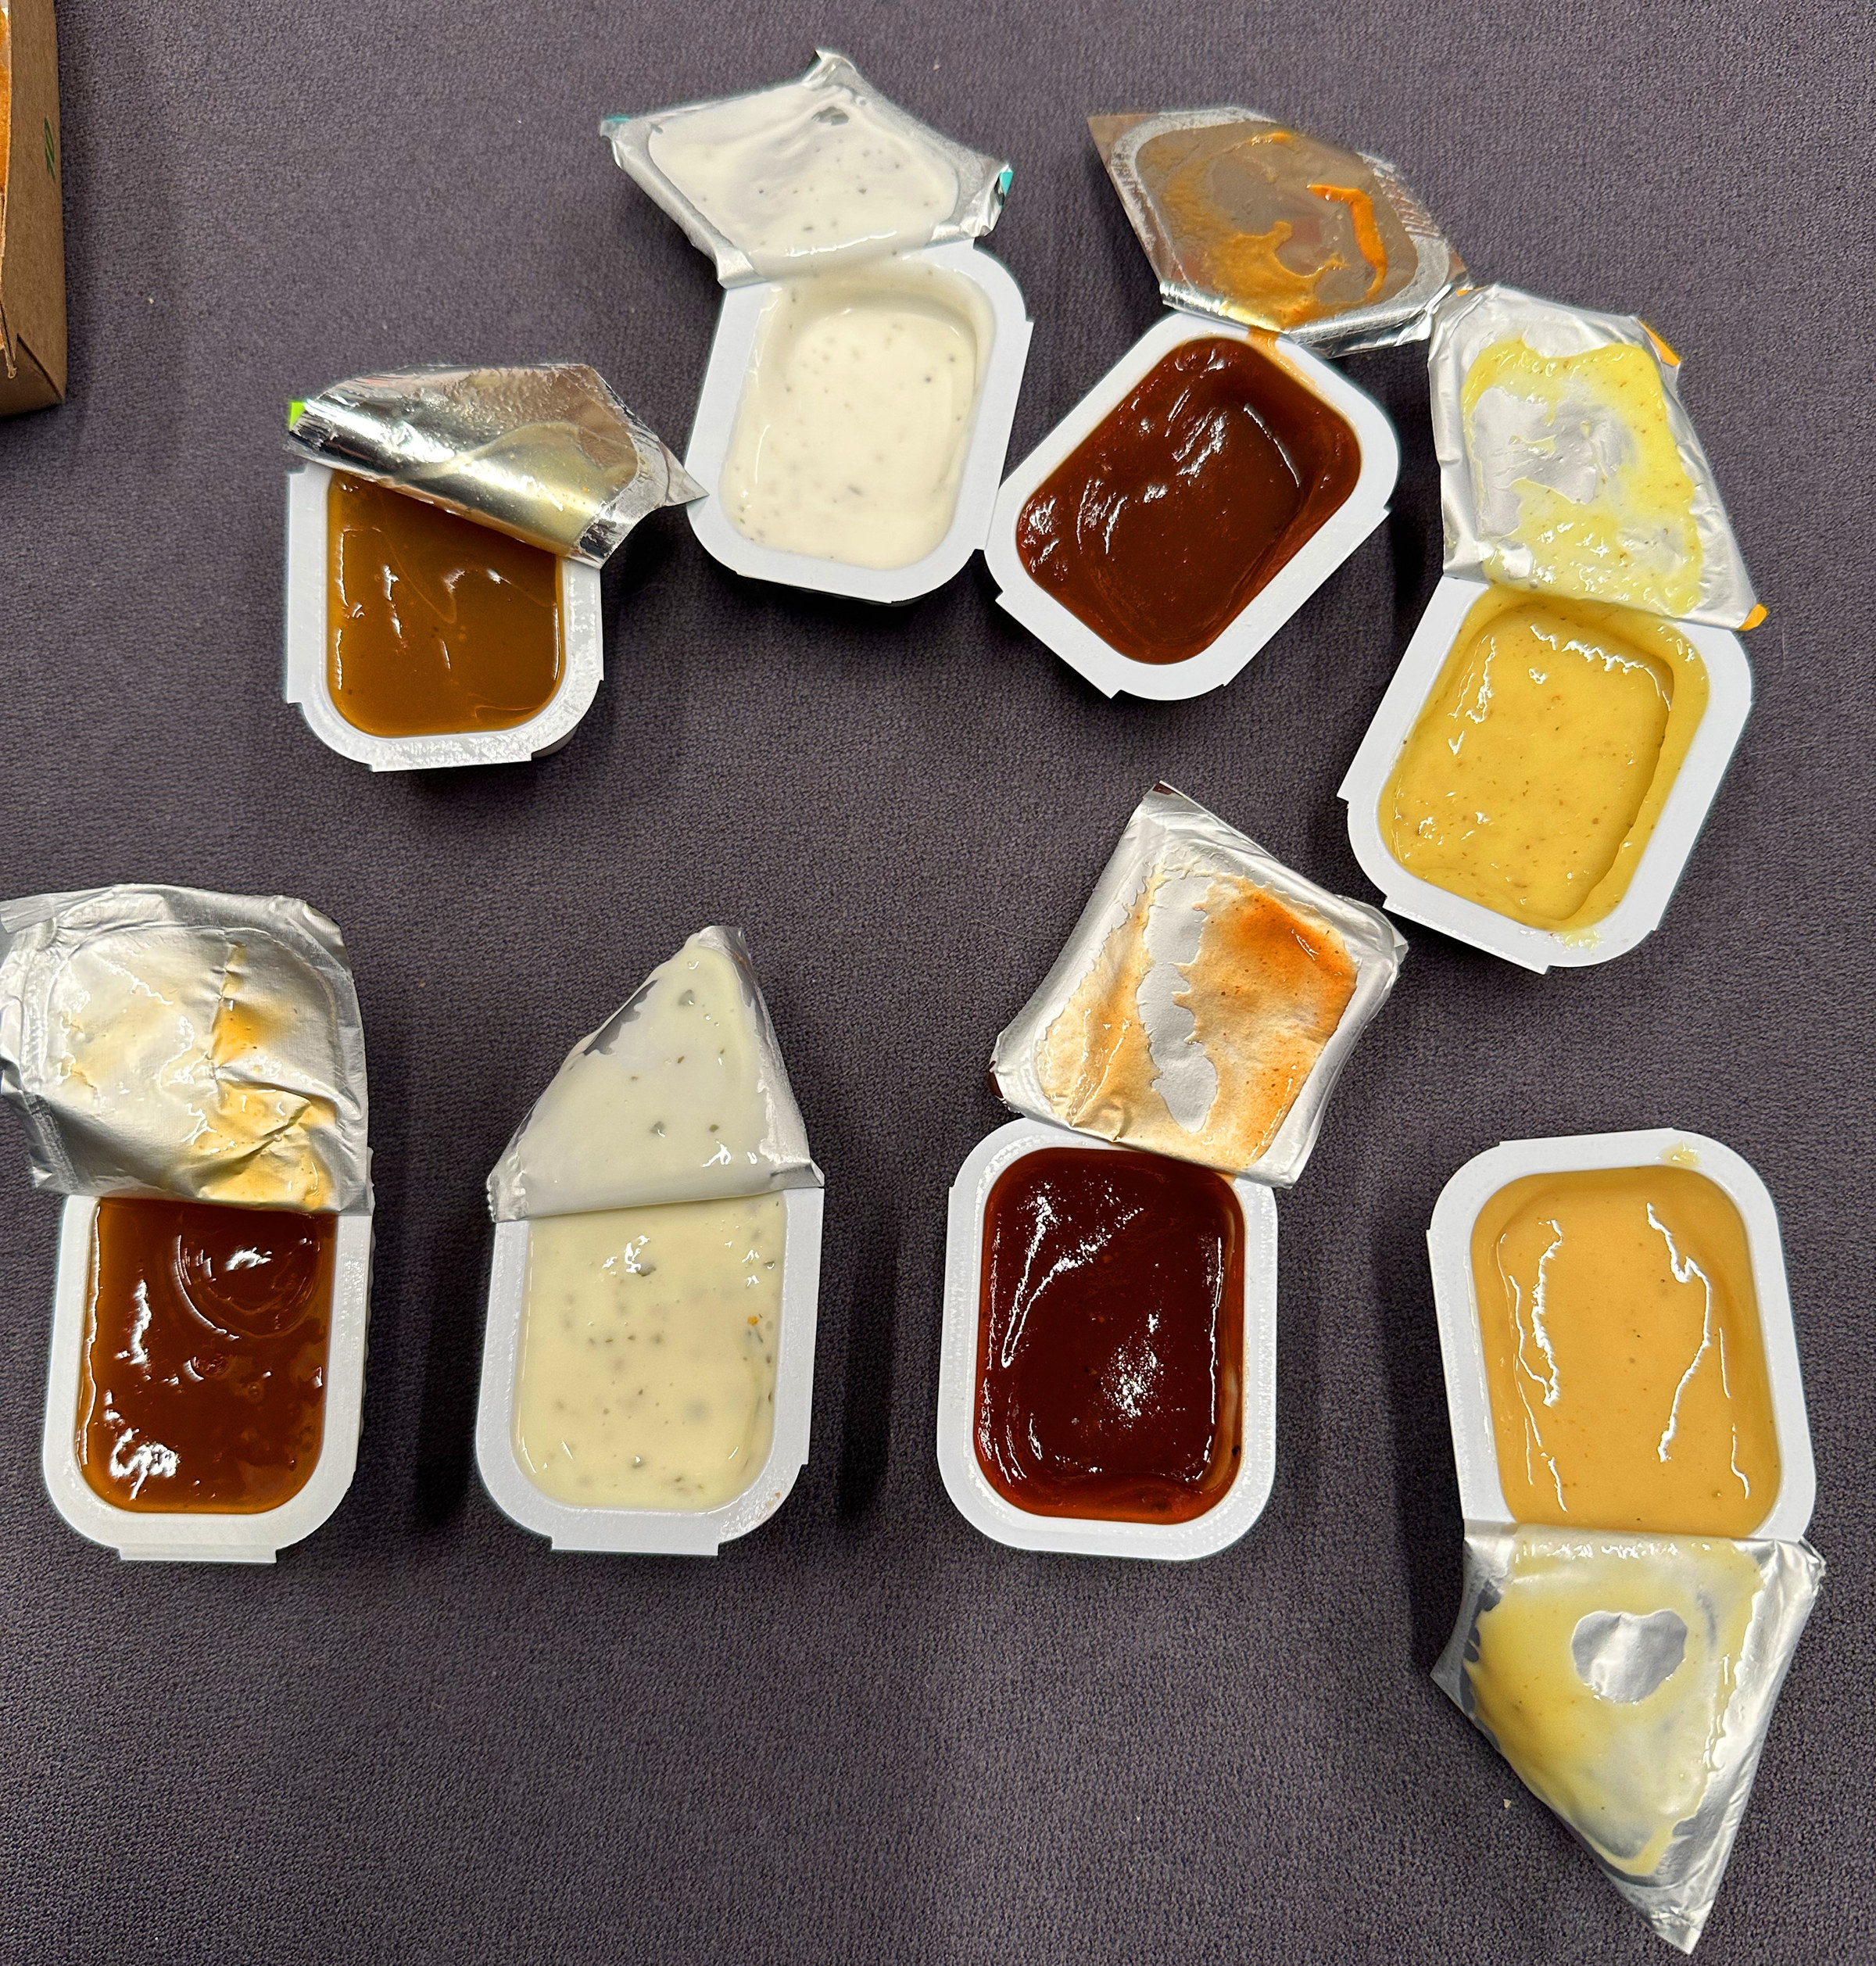 Sauces on a table